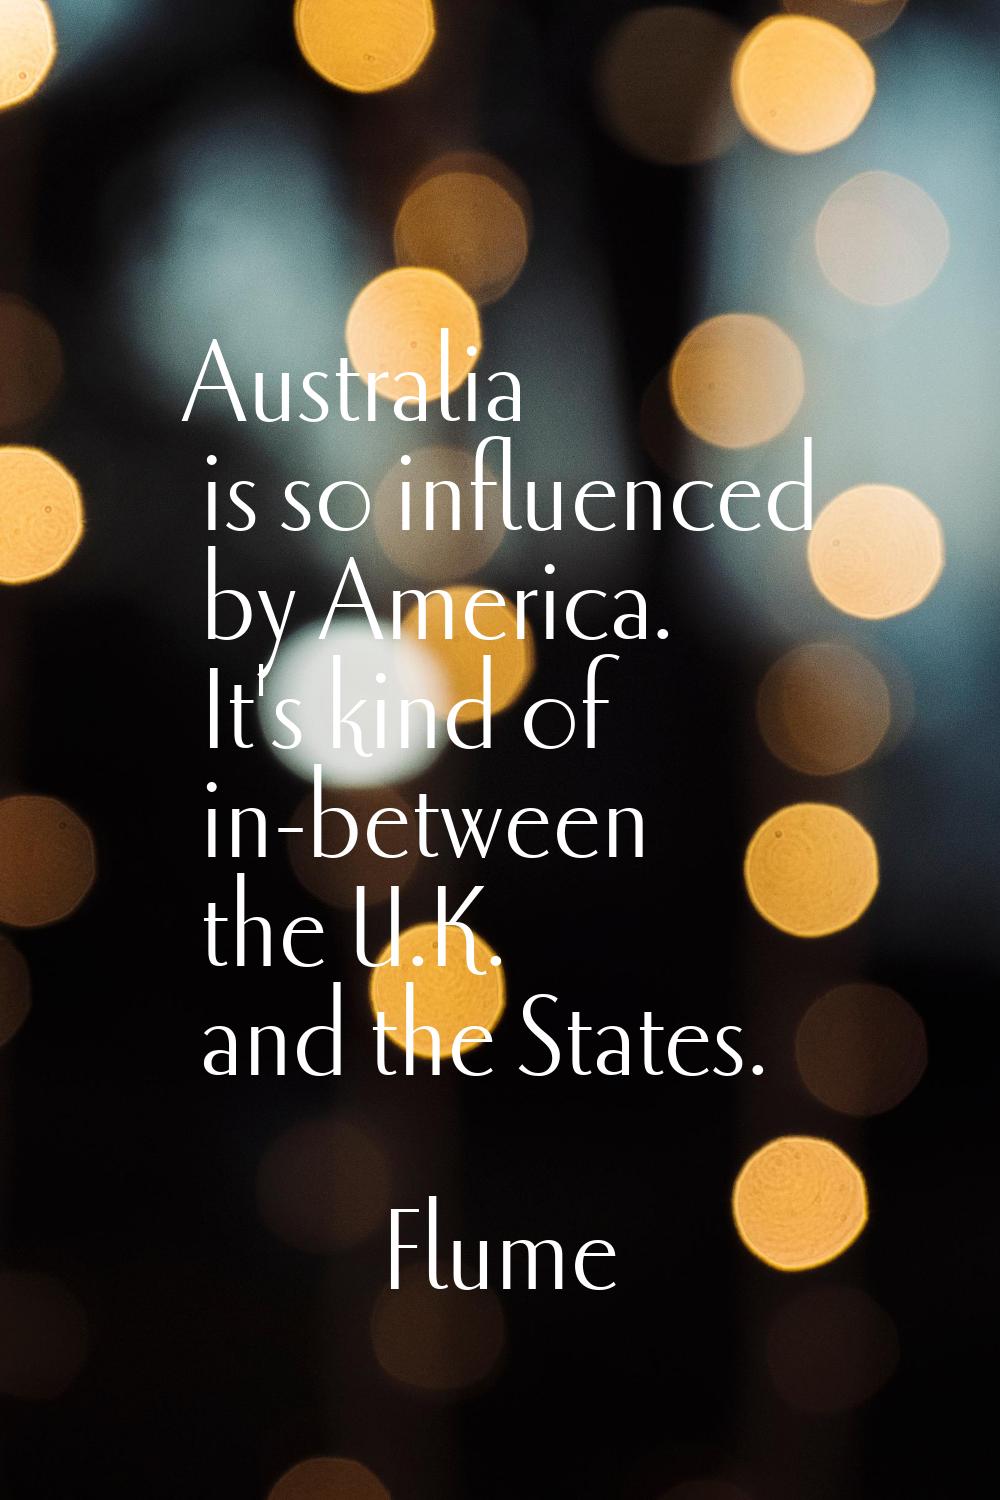 Australia is so influenced by America. It's kind of in-between the U.K. and the States.